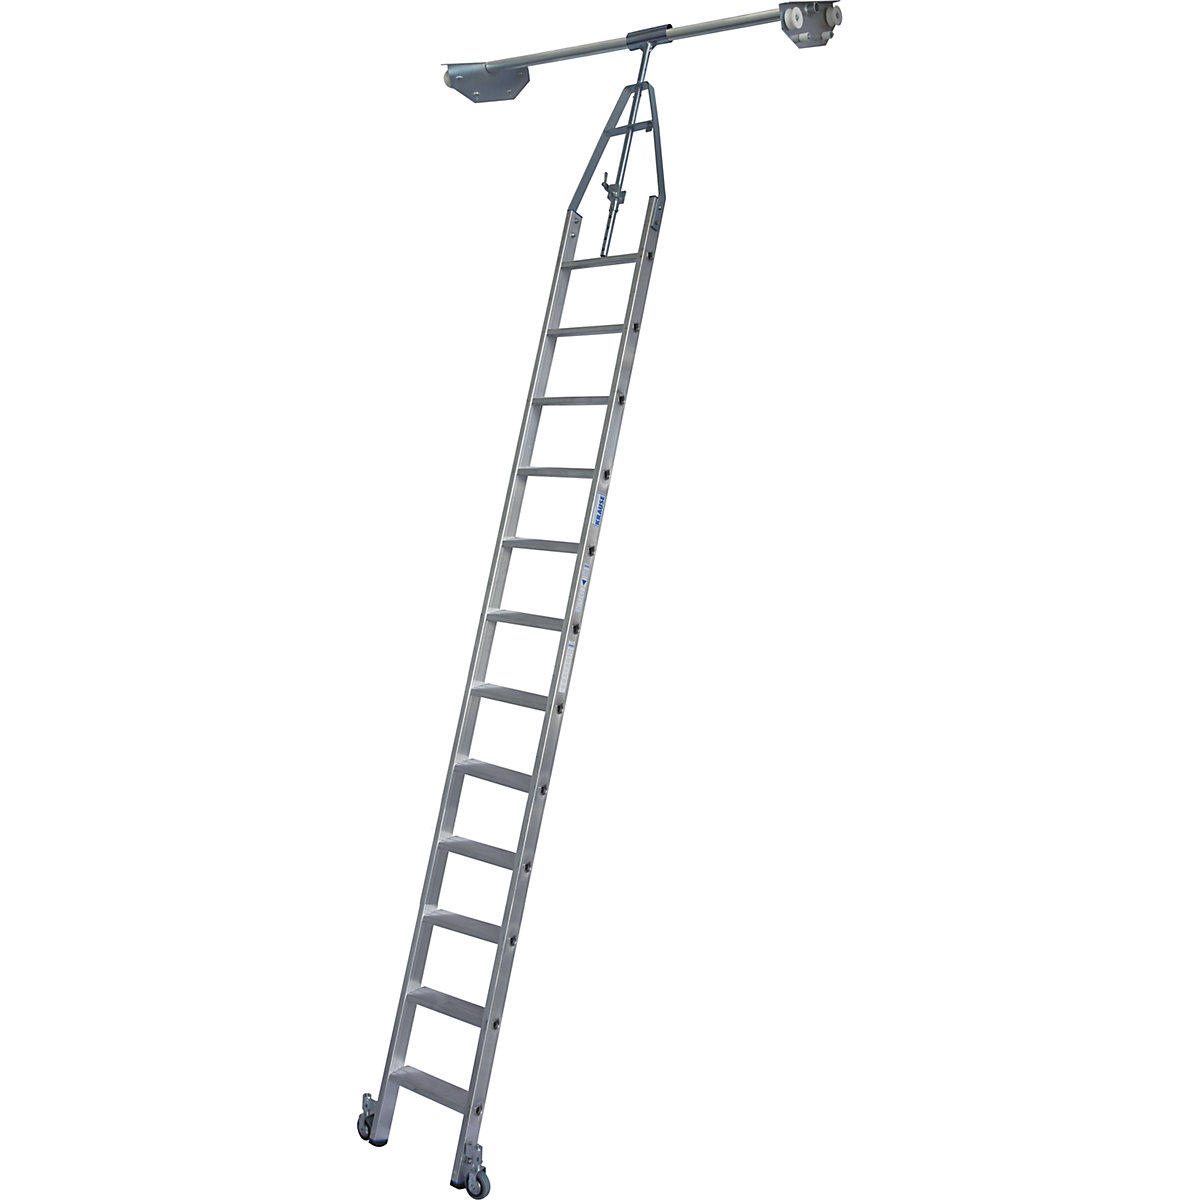 Step shelf ladder – KRAUSE, double sided shelf unit with wheel unit on top for round tubing rail system, 12 steps-4